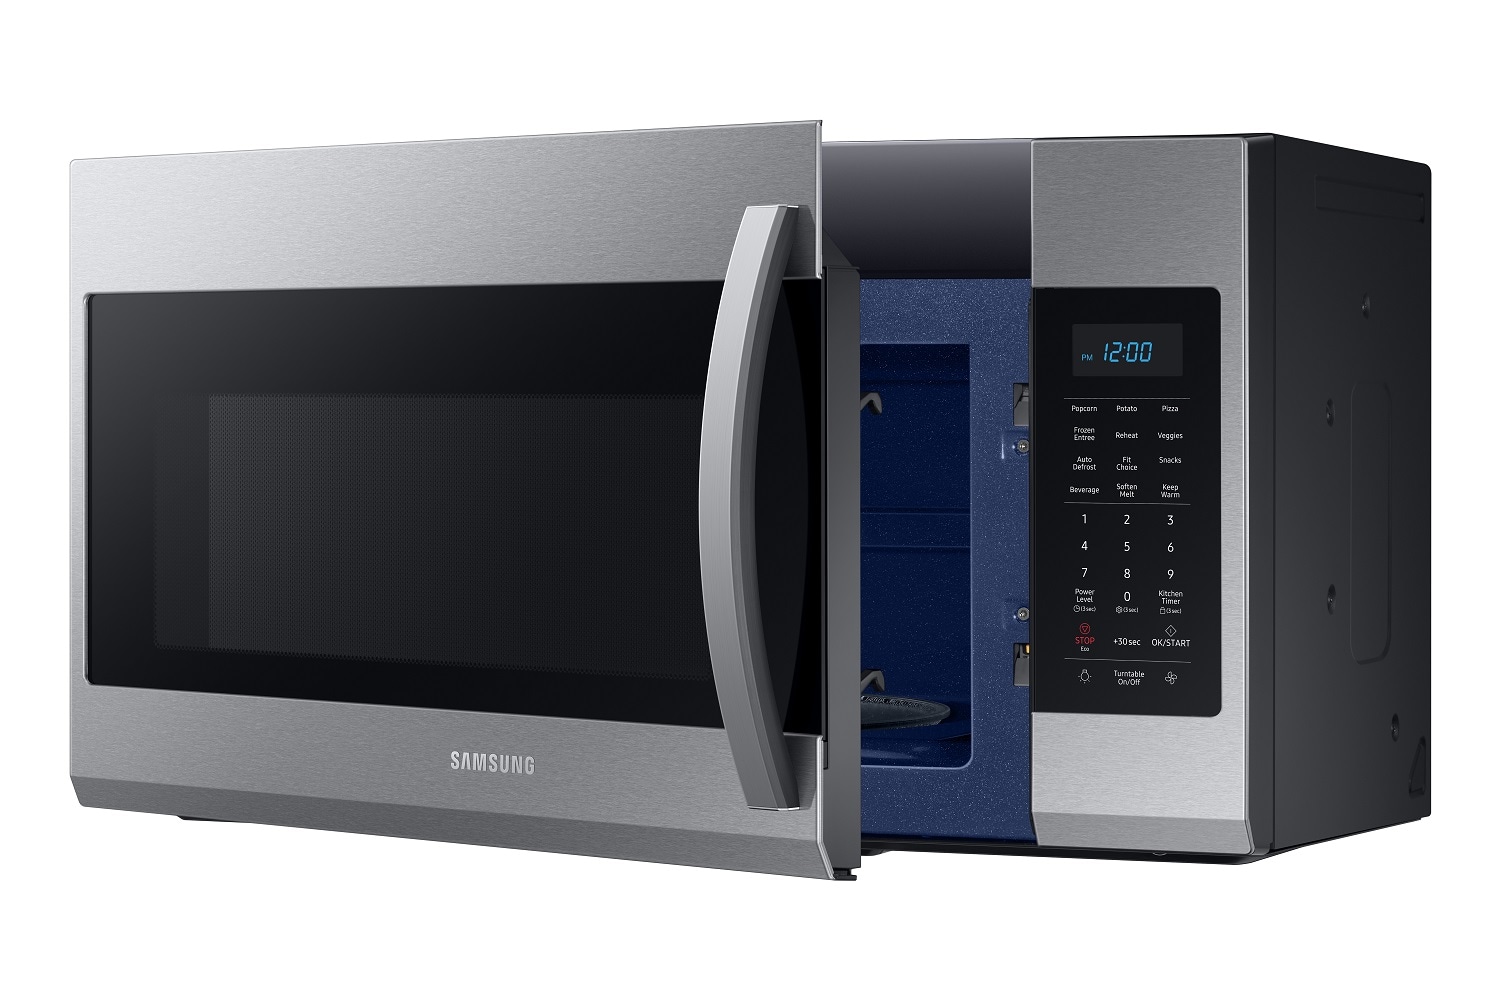 How to Deodorize a Microwave (in 5 Steps) - FindHow